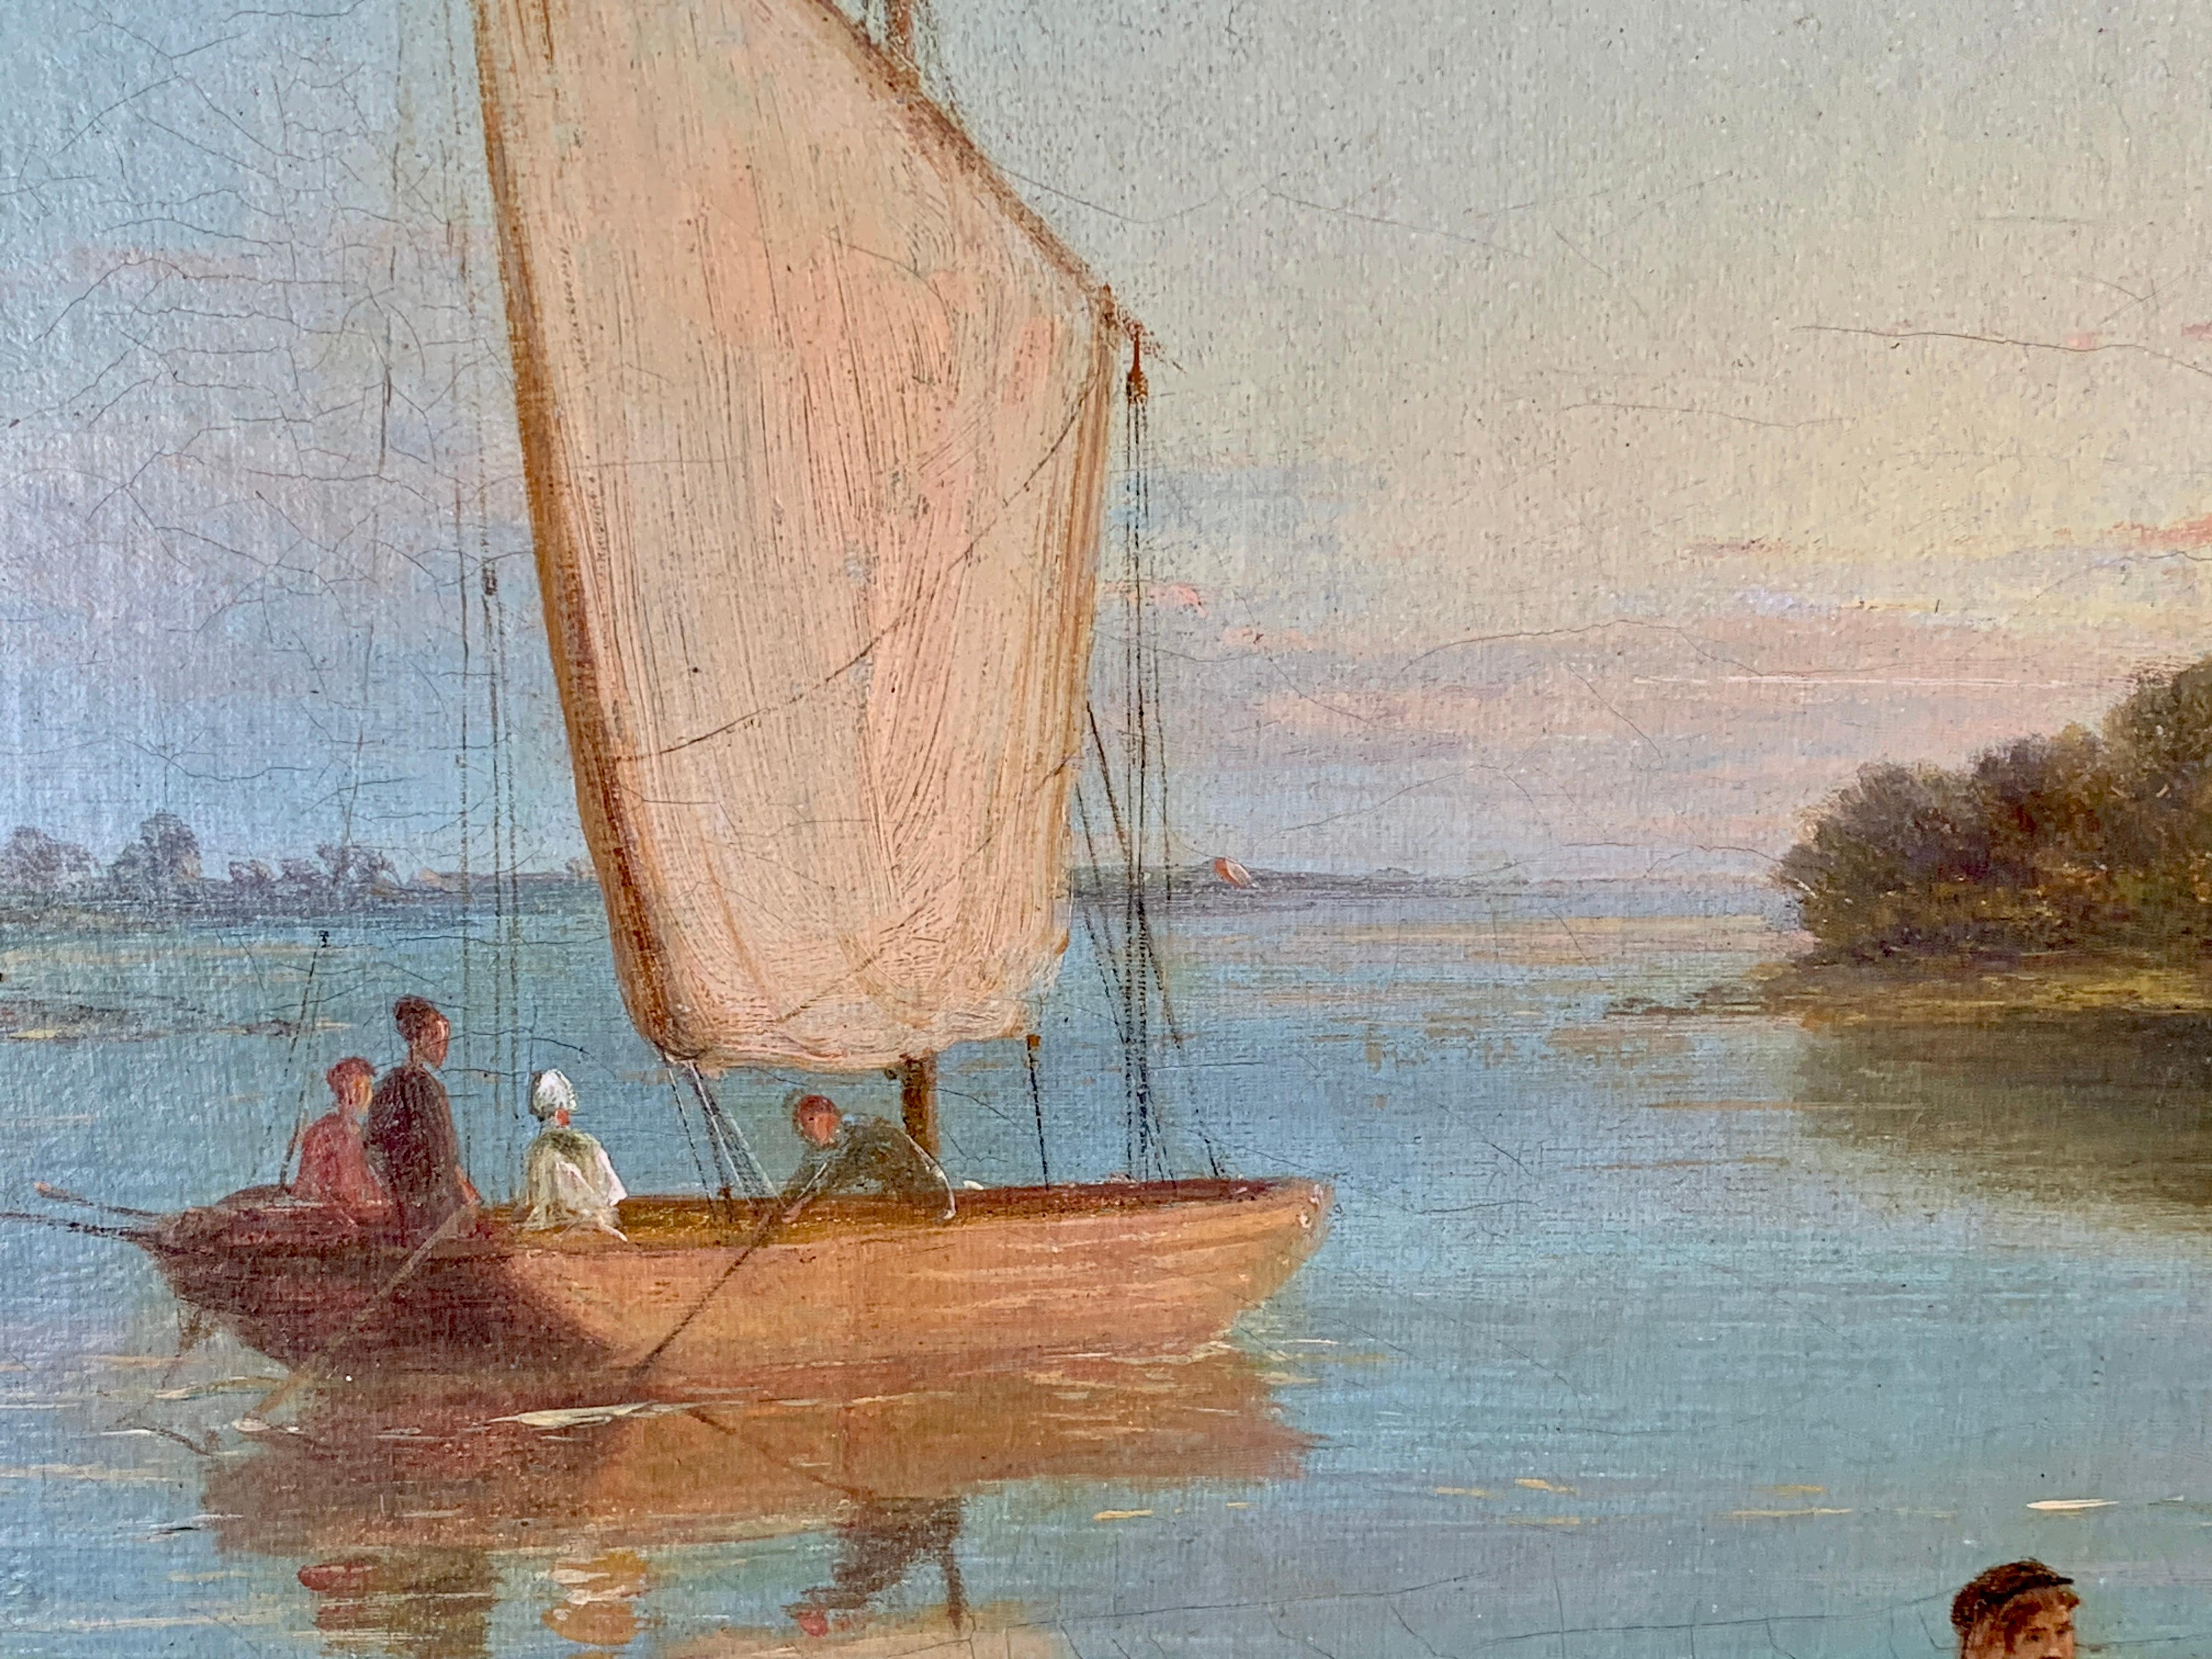 19th century Dutch figures by boats on a canal or river in a Summer landscape - Painting by Dommersen, William Raymond